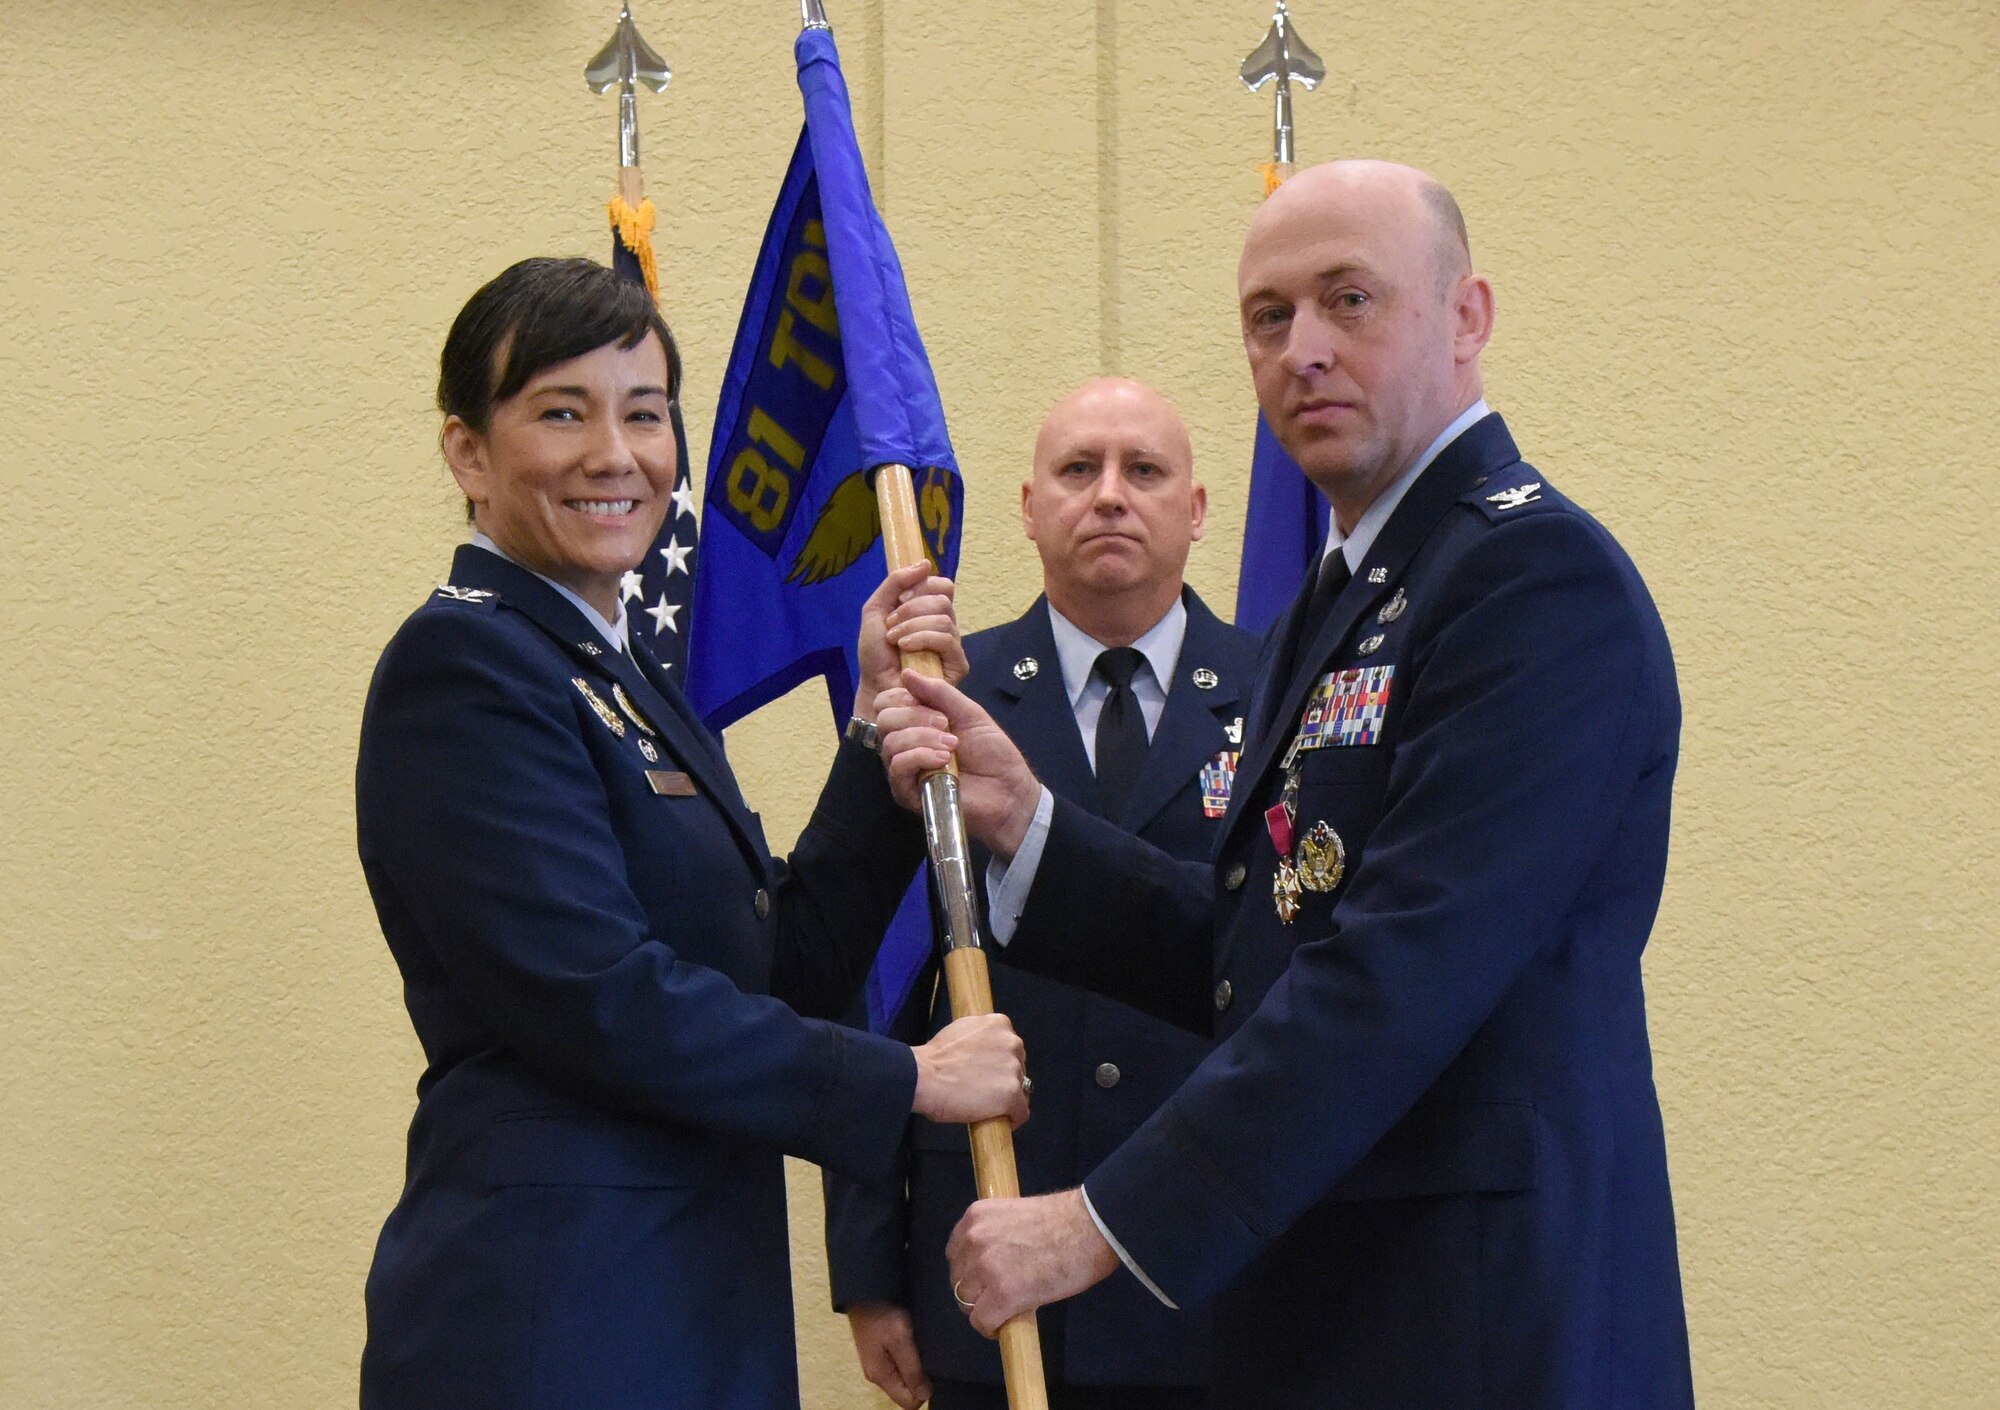 U.S. Air Force Col. Debra Lovette, 81st Training Wing commander, takes the 81st Mission Support Group guidon from Col. Danny Davis, outgoing 81st MSG commander, during the 81st MSG change of command ceremony in the Bay Breeze Event Center at Keesler Air Force Base, Mississippi, July 19, 2018. The passing of the guidon is a ceremonial symbol of exchanging command from one commander to another. (U.S. Air Force photo by Kemberly Groue)